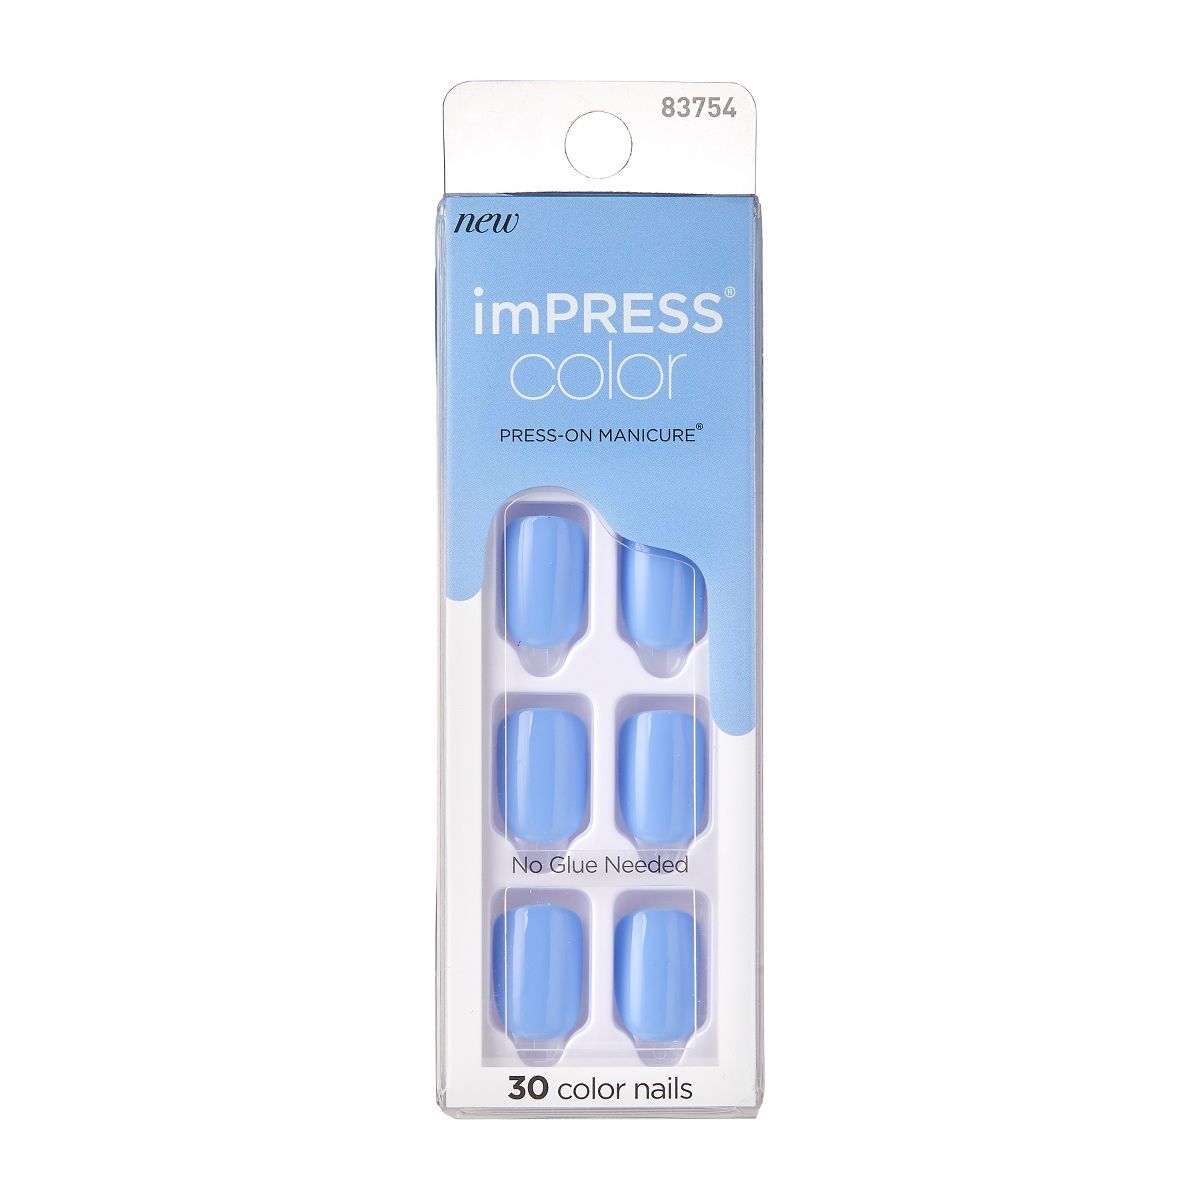 KISS imPRESS Color Press-On Fake Nails - Baby Why So Blue - 30ct | Target